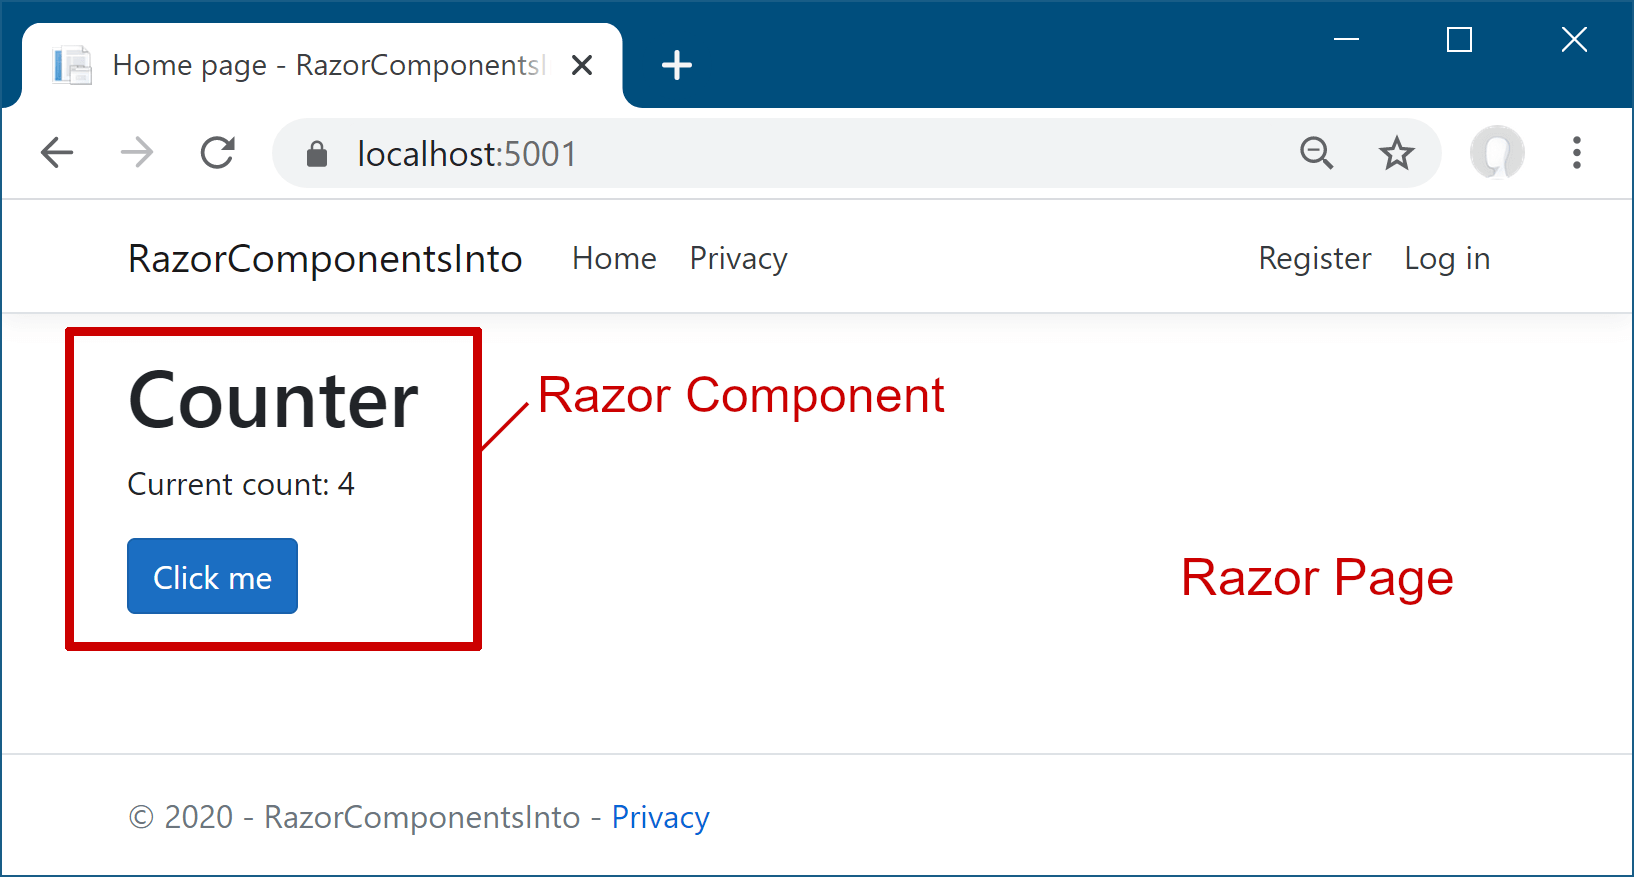 Blazor being used inside a Razor Pages app